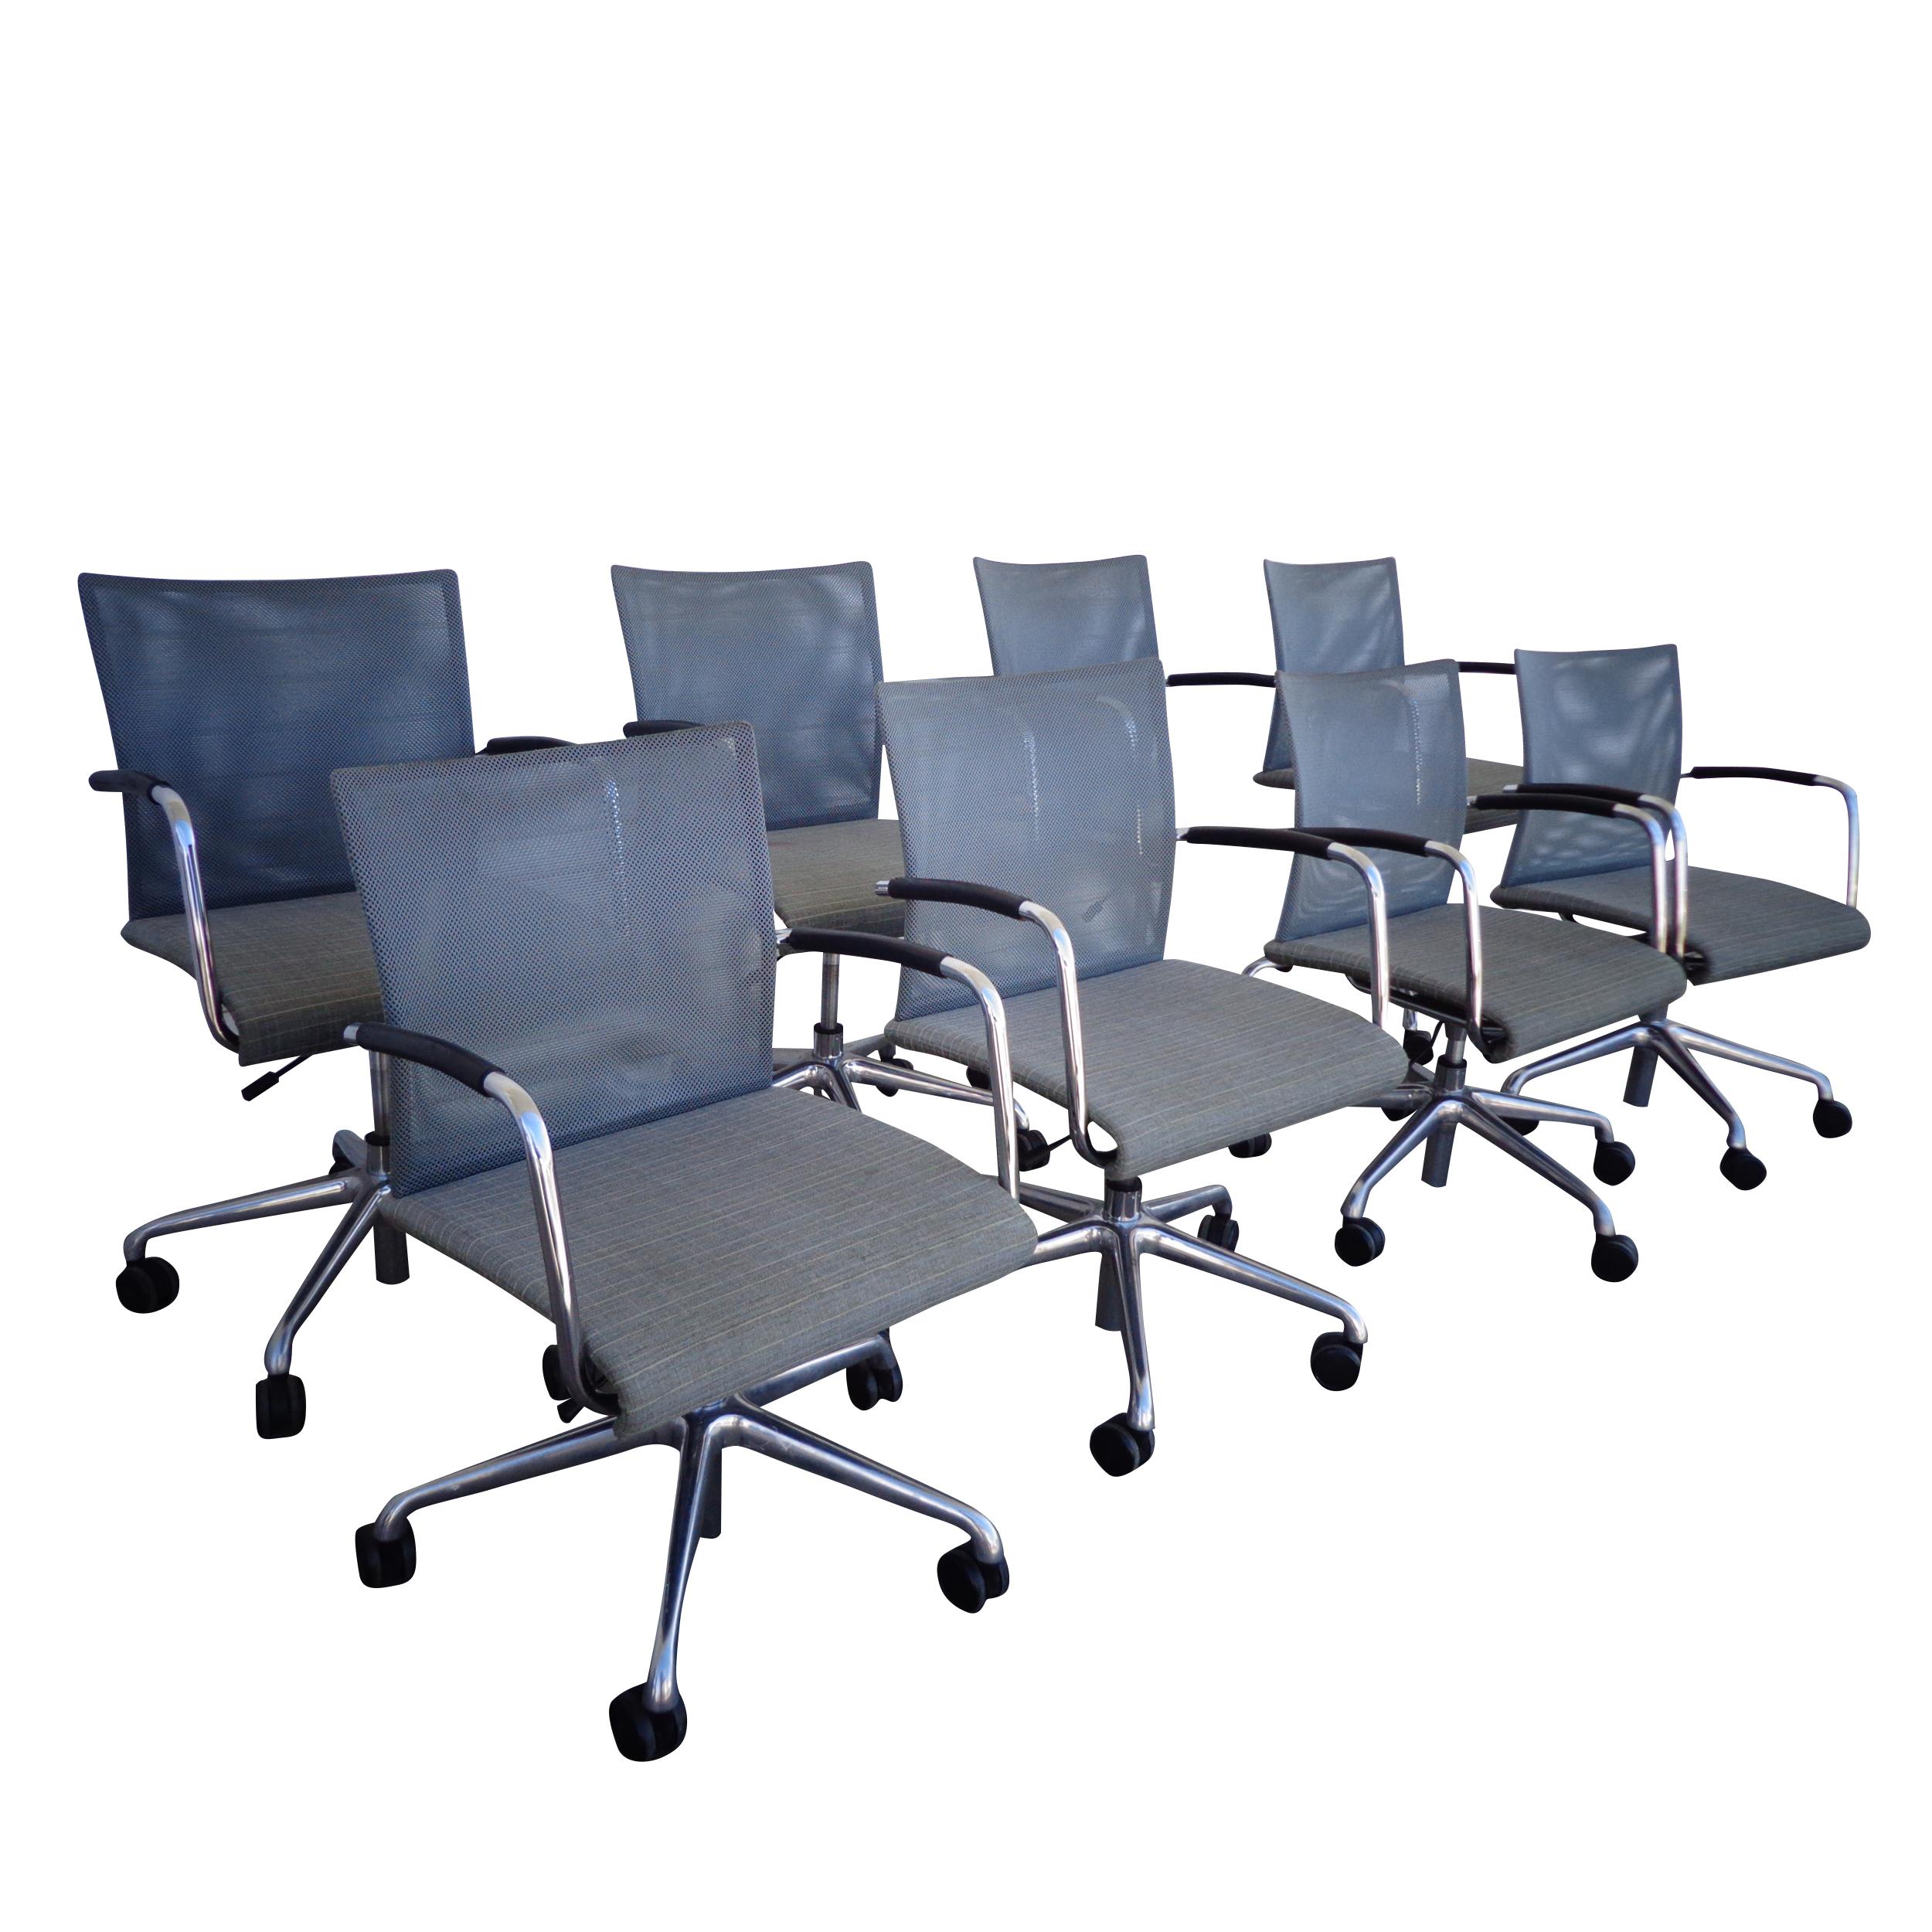 North American 6 Dauphin Stilo Conference Chairs by Jessica Engelhardt For Sale